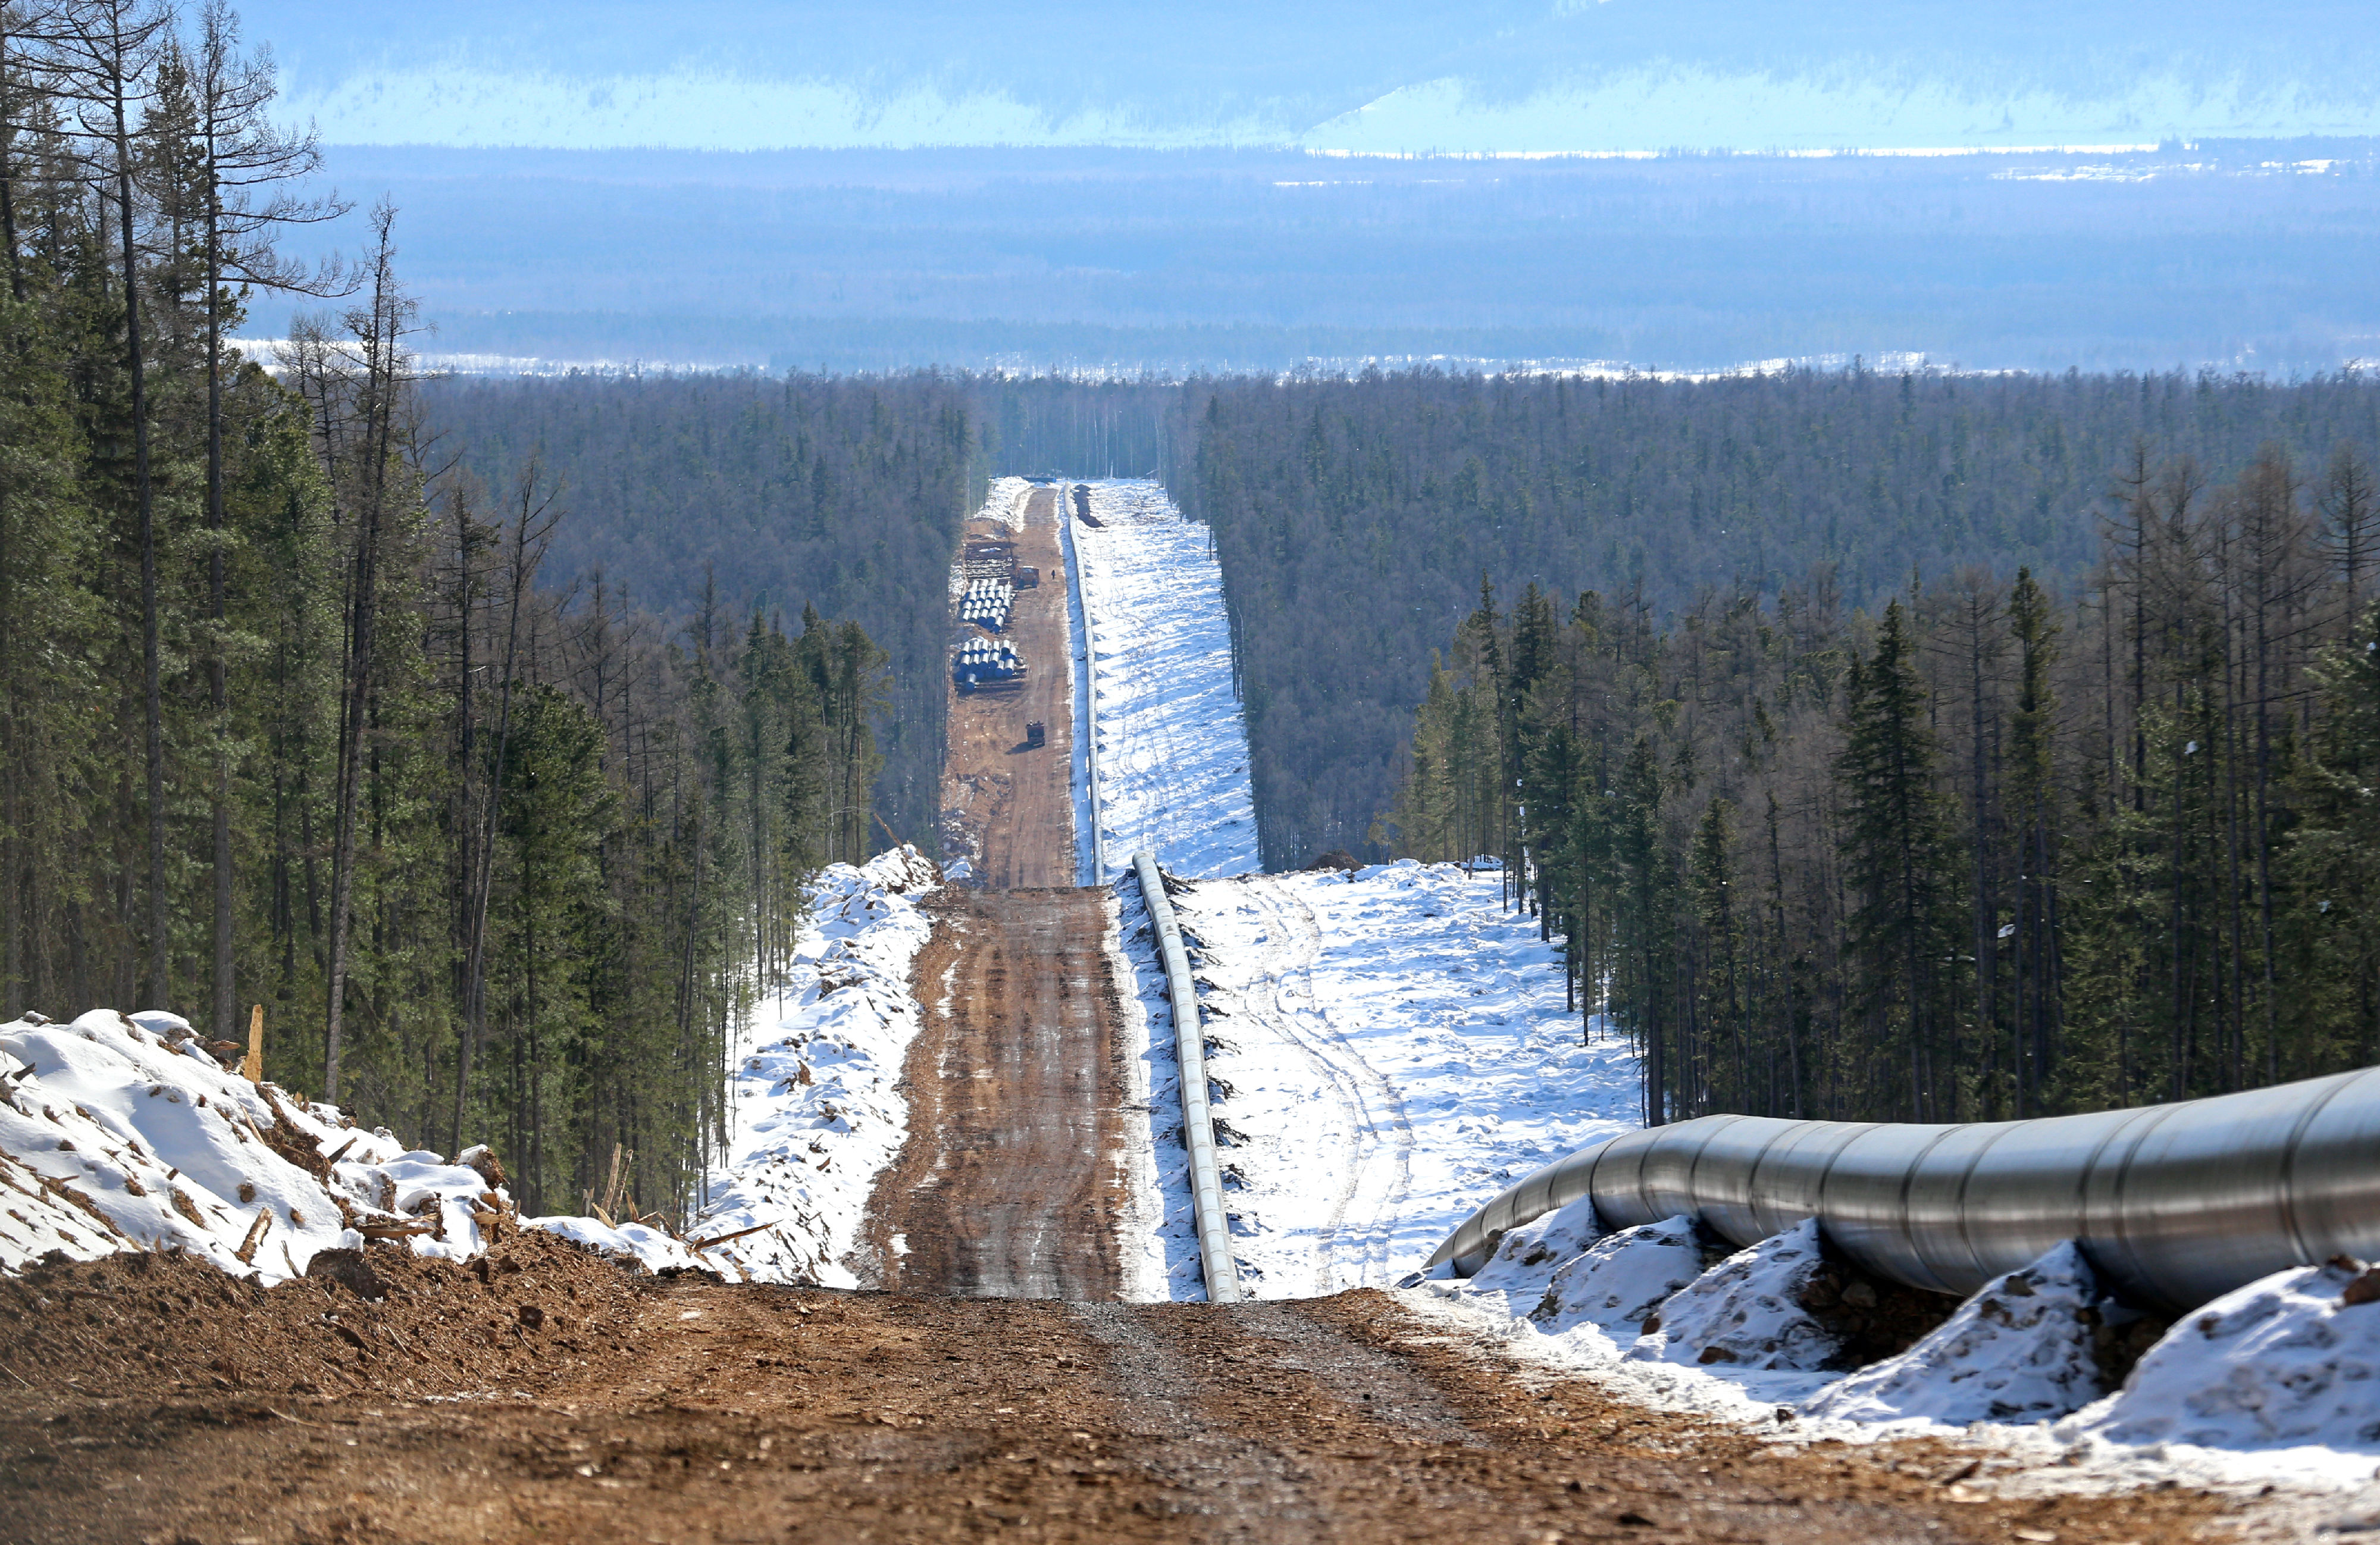 Russia's Power Of Siberia Pipeline May Slow Down LNG Supply To China